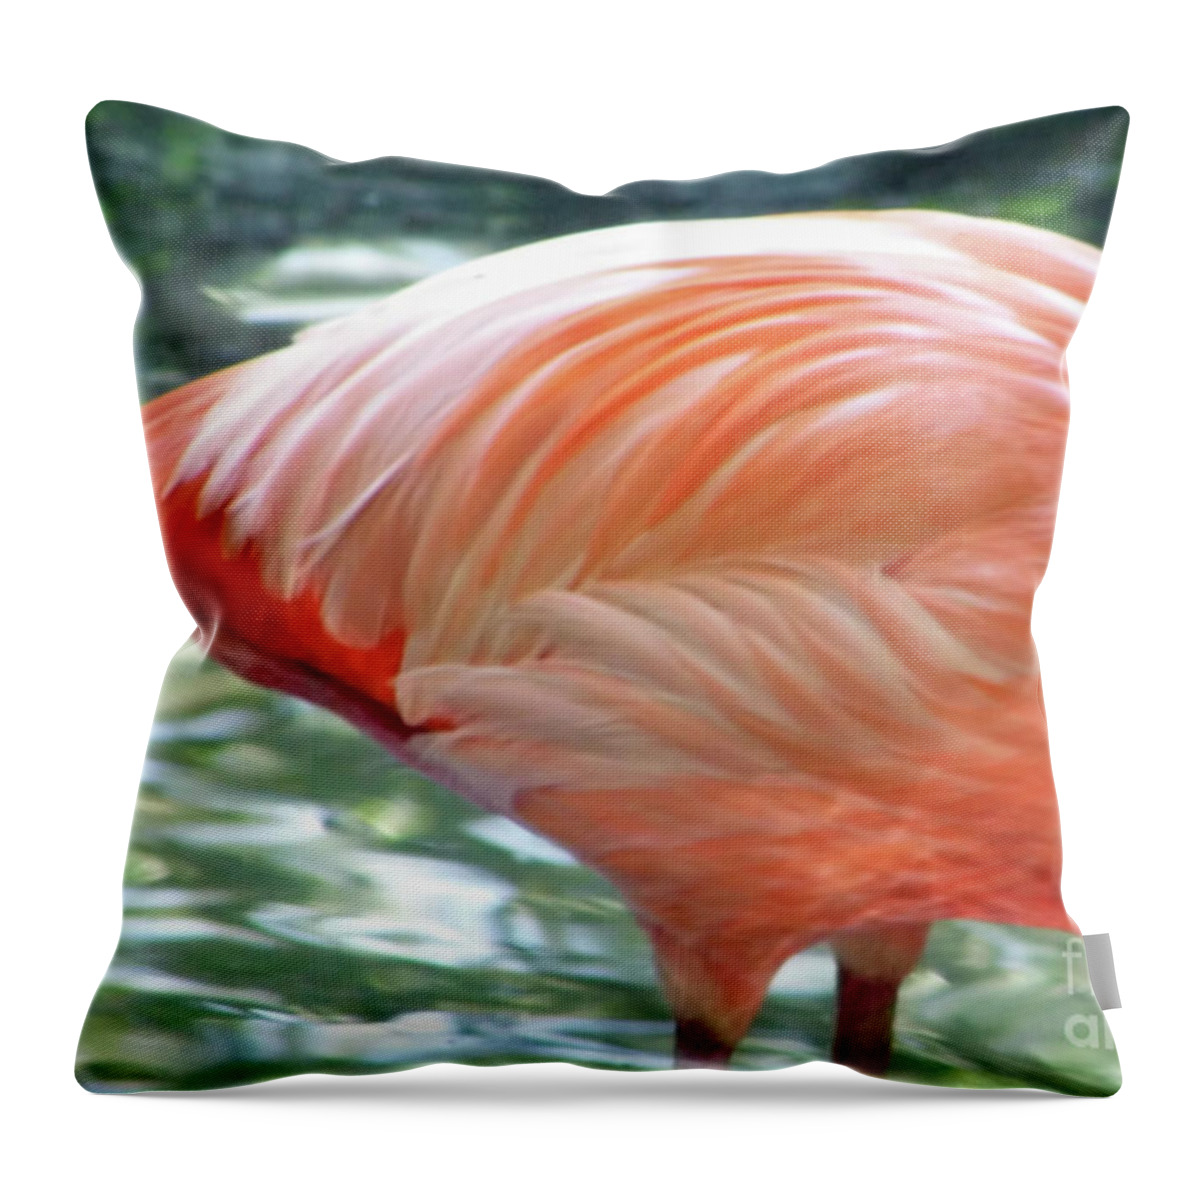 Flamingo Throw Pillow featuring the photograph Flamingo Feathers by D Hackett